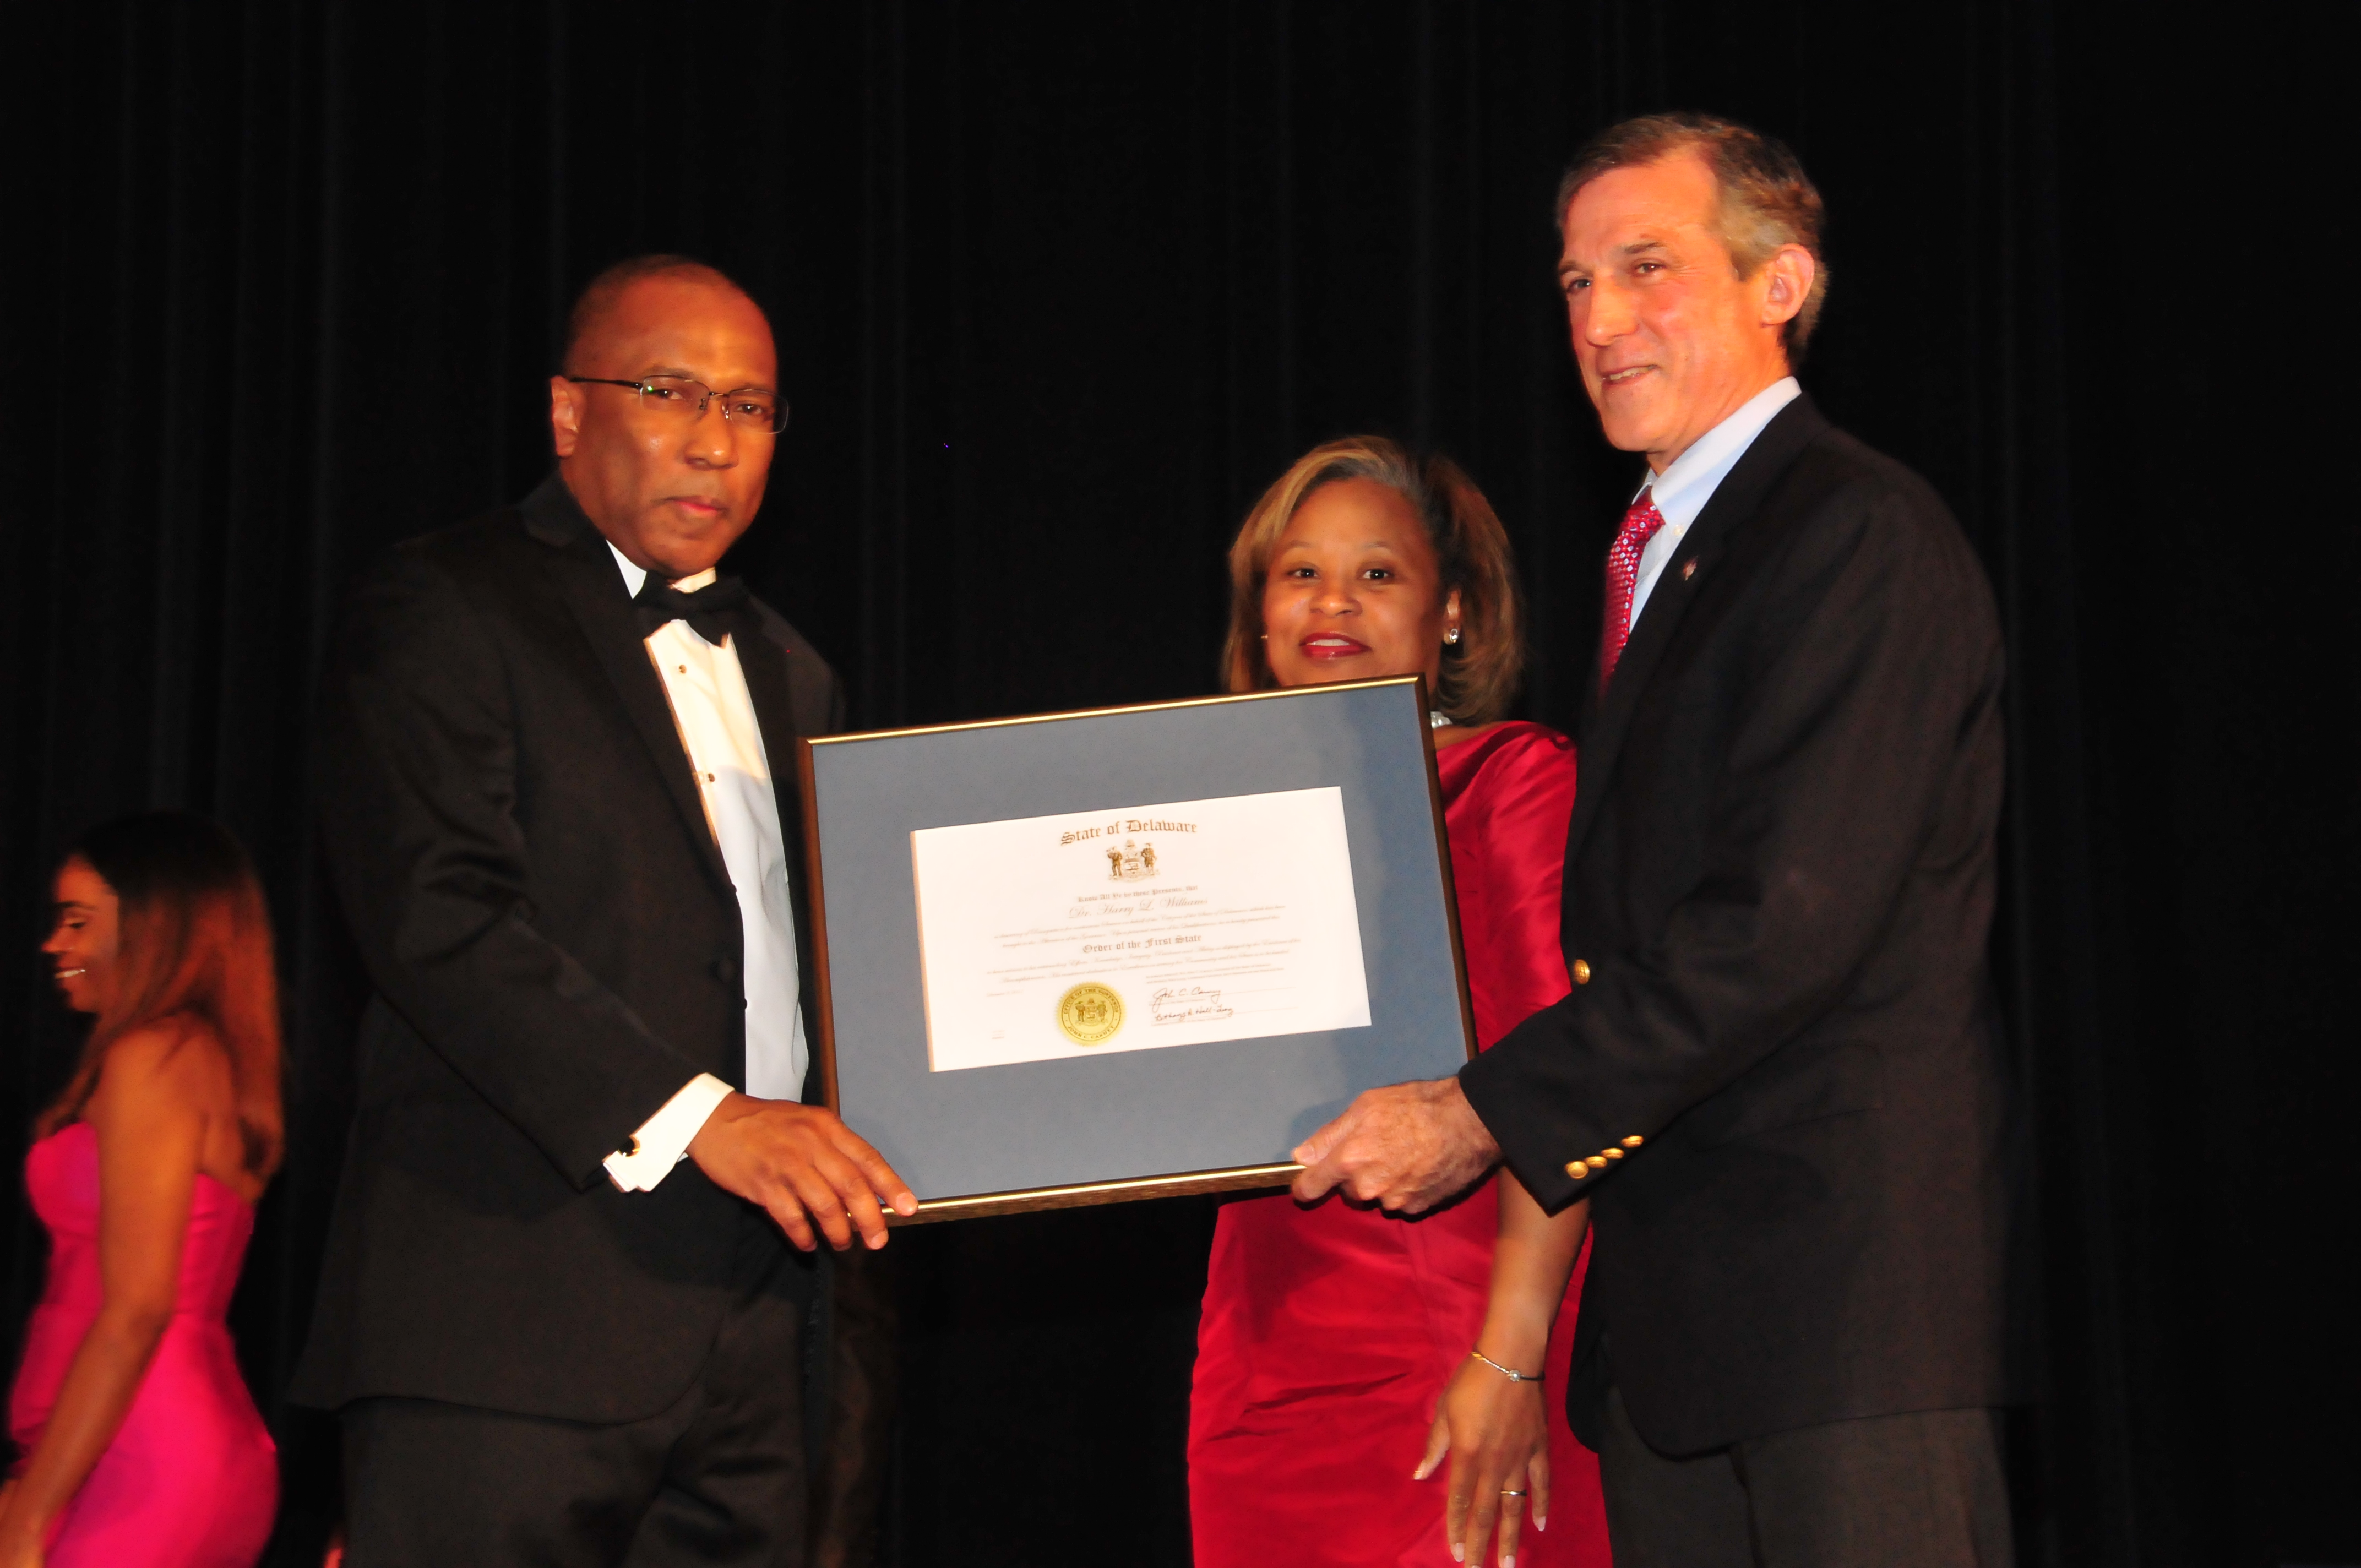 Dr. Harry L. Williams (l), joined by his wife Dr. Robin Williams, receives the Order of the First State from Delaware Gov. John Carney during the Dec. 9 President's Scholarship Ball.